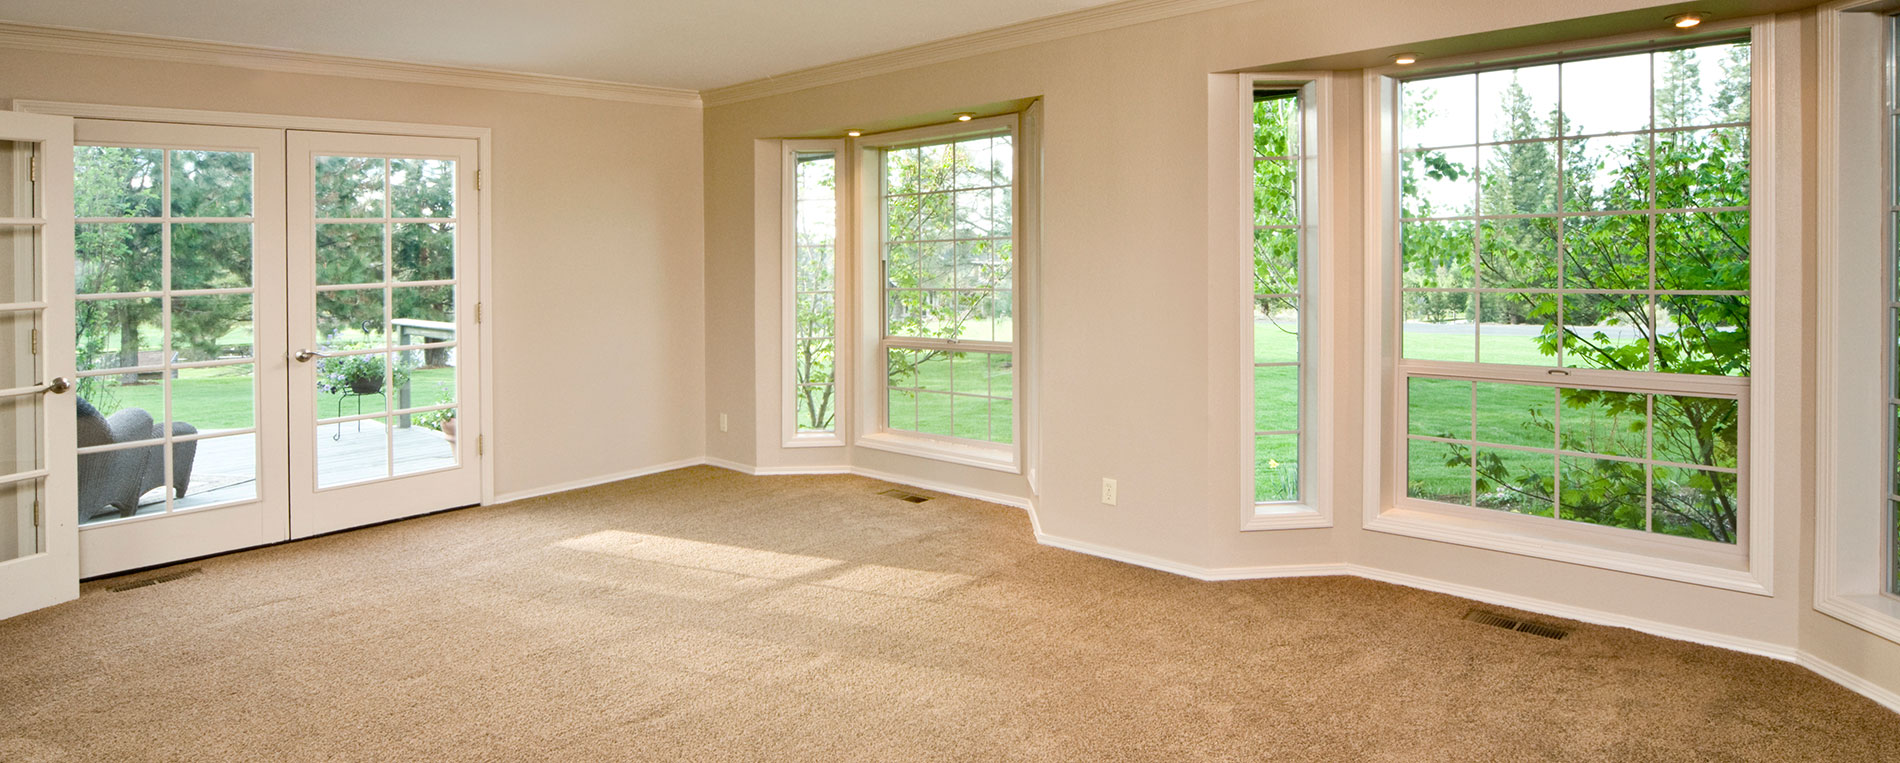 Commercial Carpet Cleaning Pricing Tips